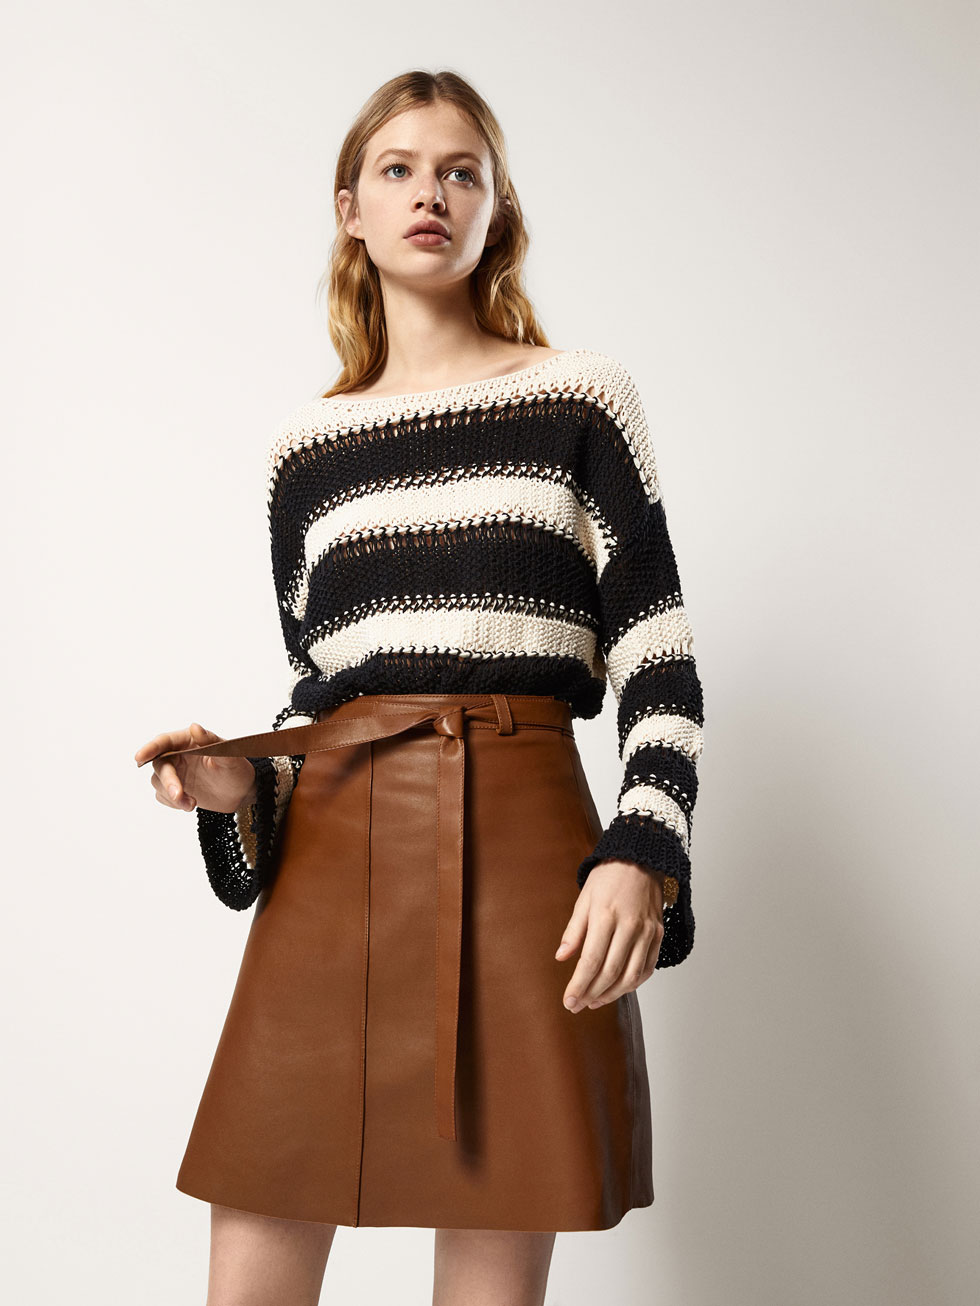 Never Pay Full Price for Nappa Leather Skirt With Seam Details